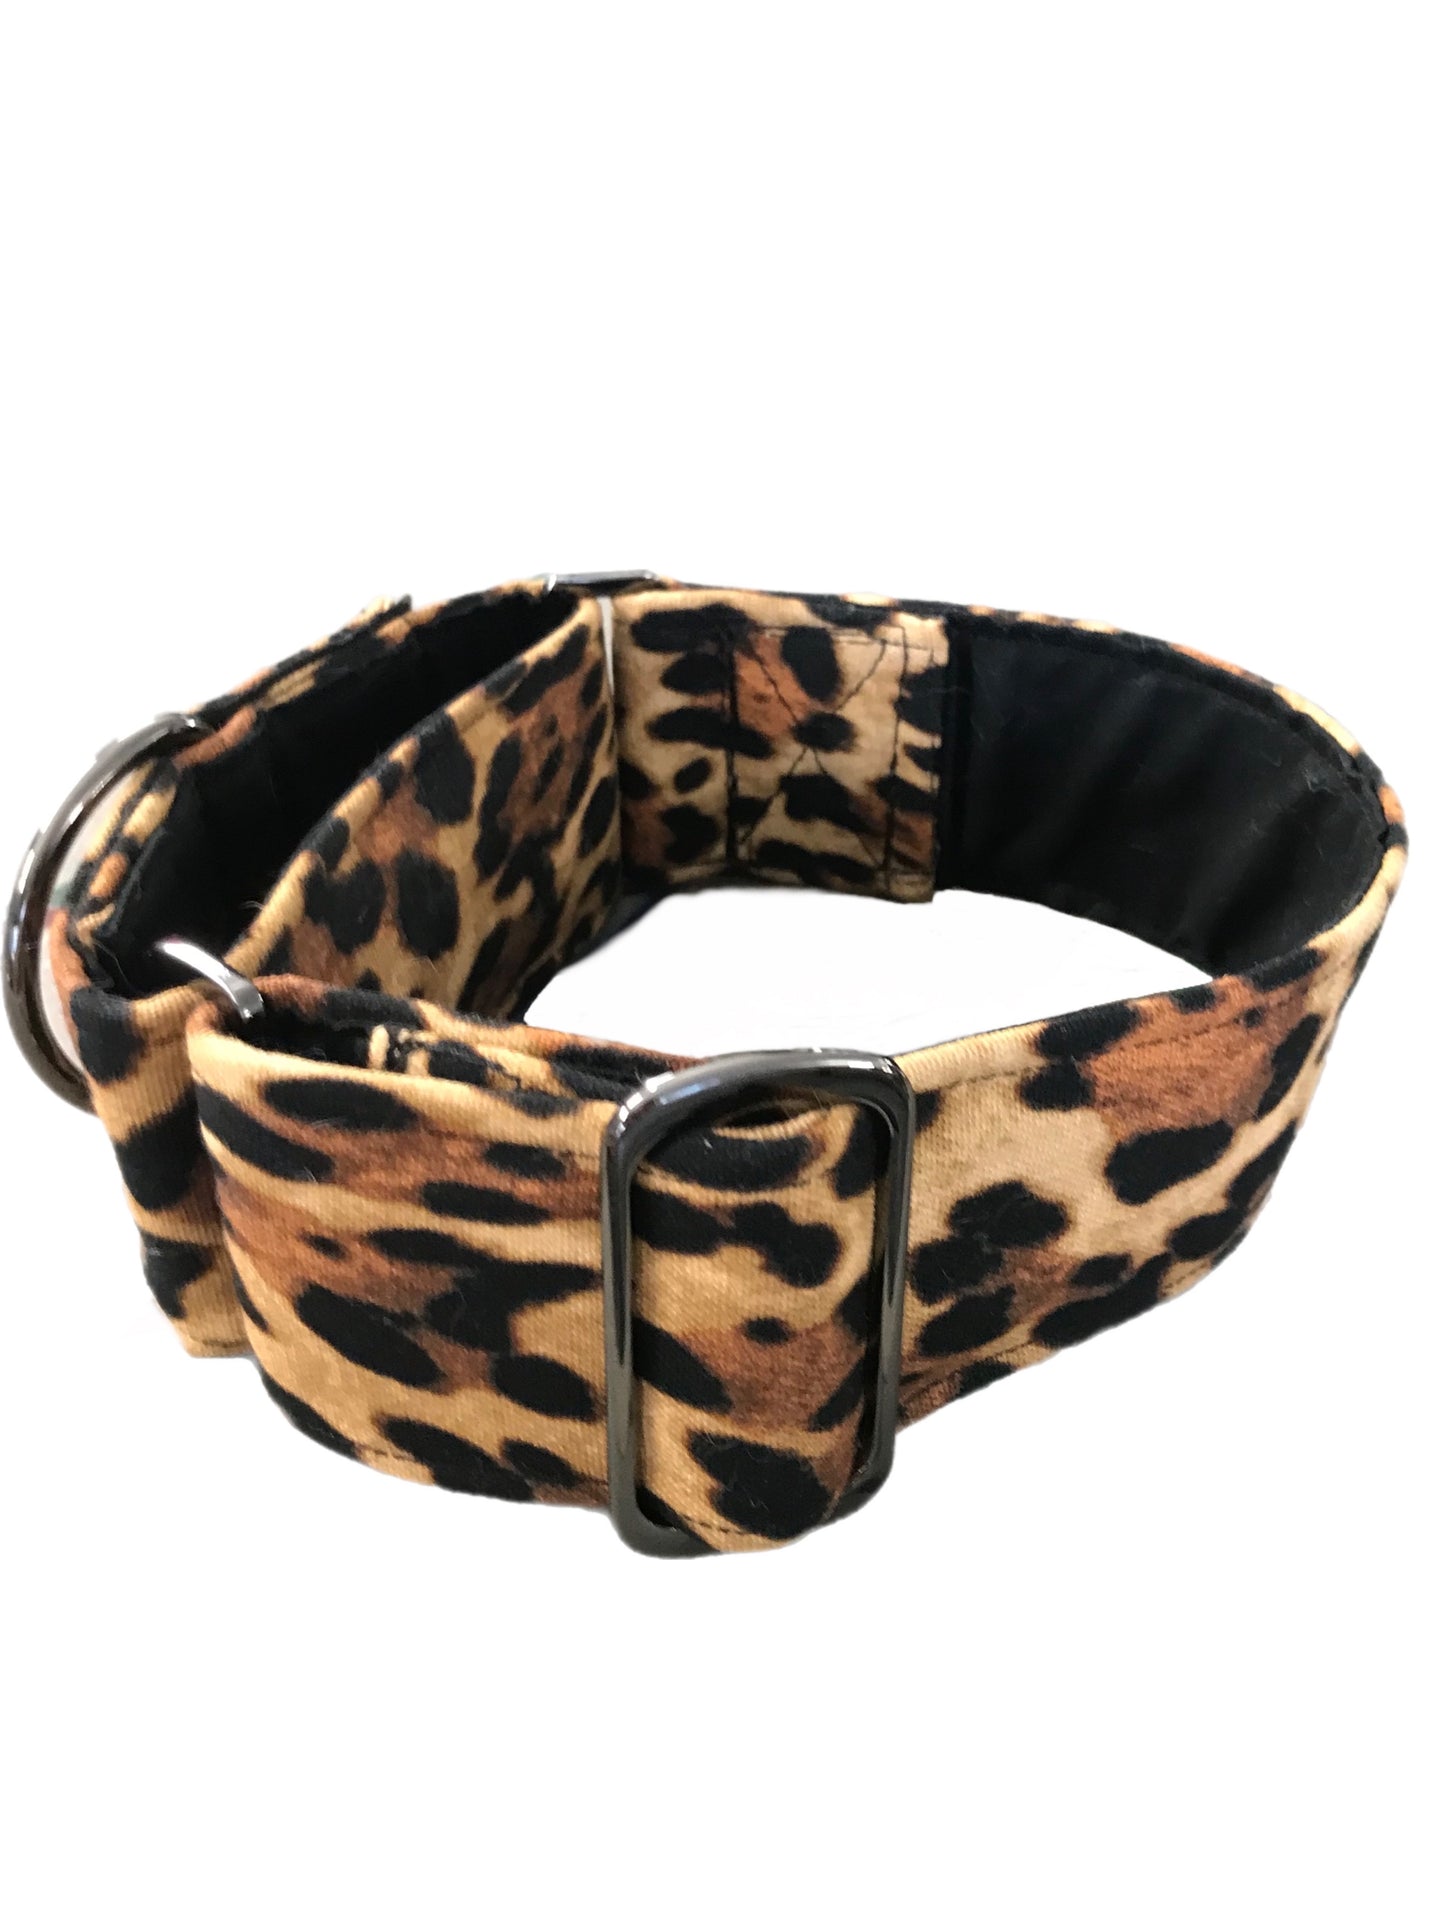 Leopard print Greyhound Martingale collar cotton covered 50mm width sturdy cotton